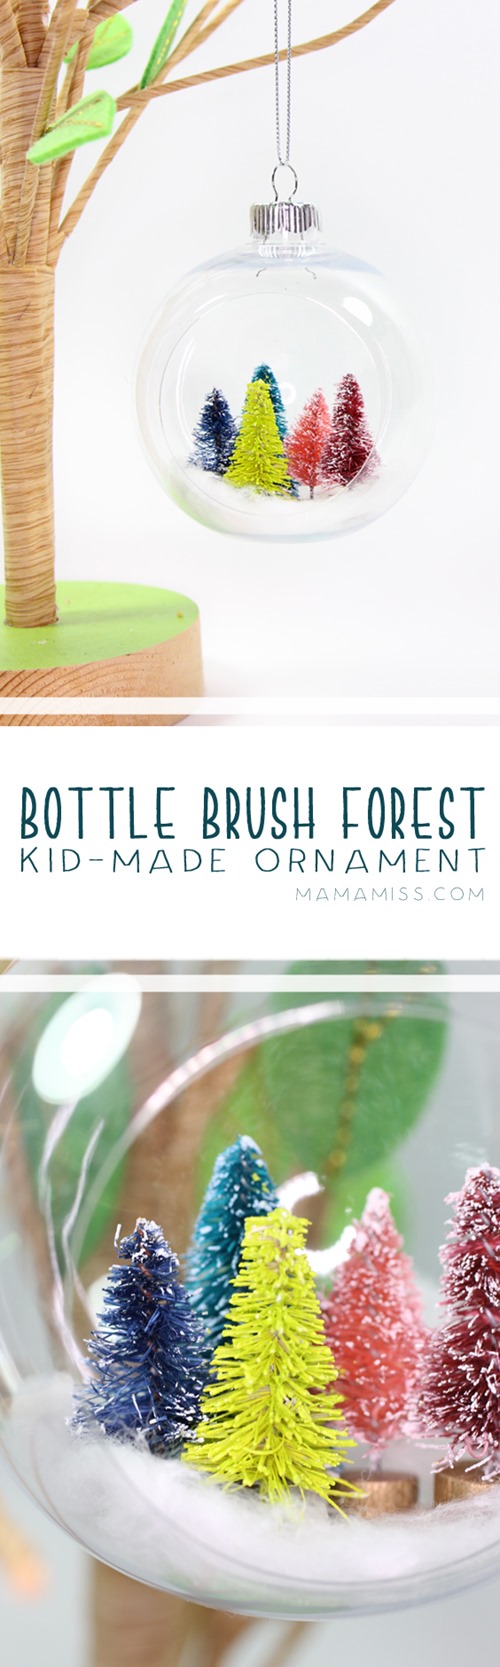 Bottle Brush Forest Ornament - Made by Kids! Inspired by the kids book Pick a Pine Tree from @mamamissblog for a #KidMadeChristmas